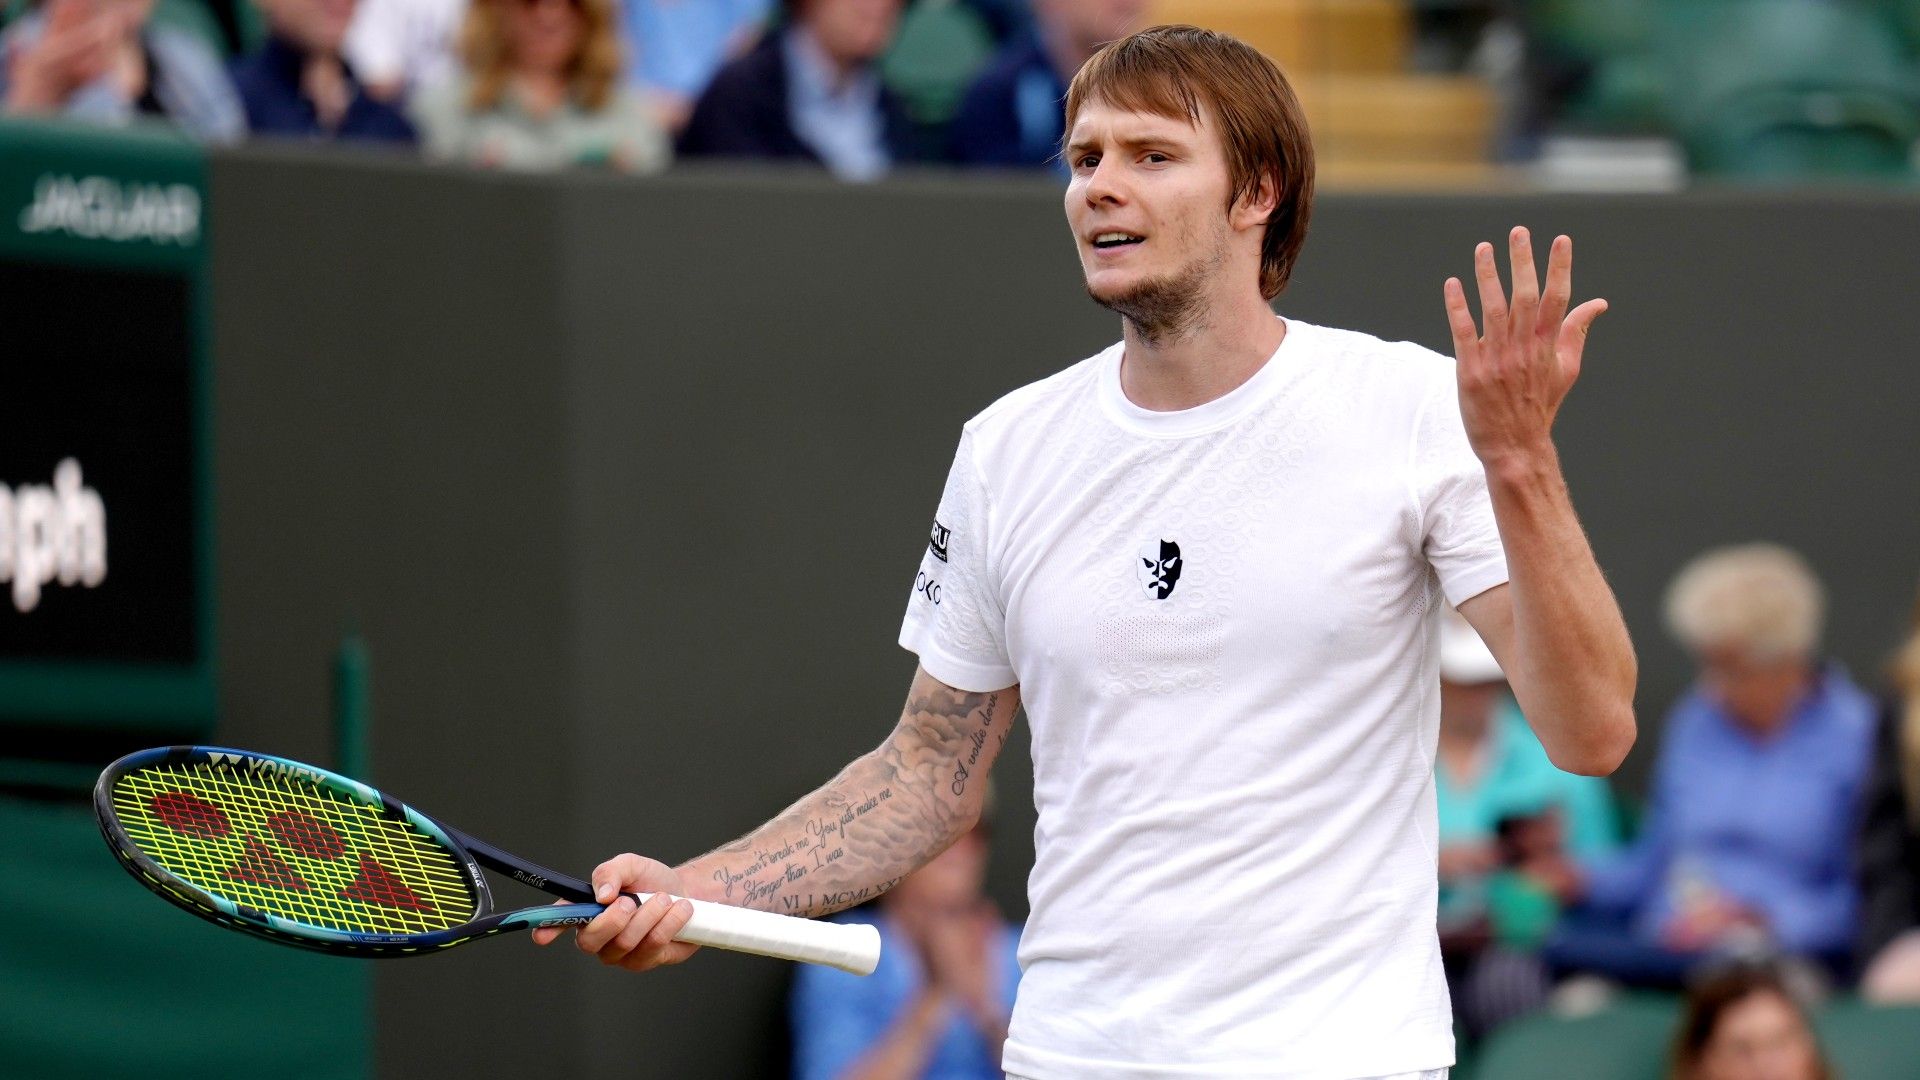 Alexander Bublik serves underarm six times in one game, while Nick Kyrgios makes jokes